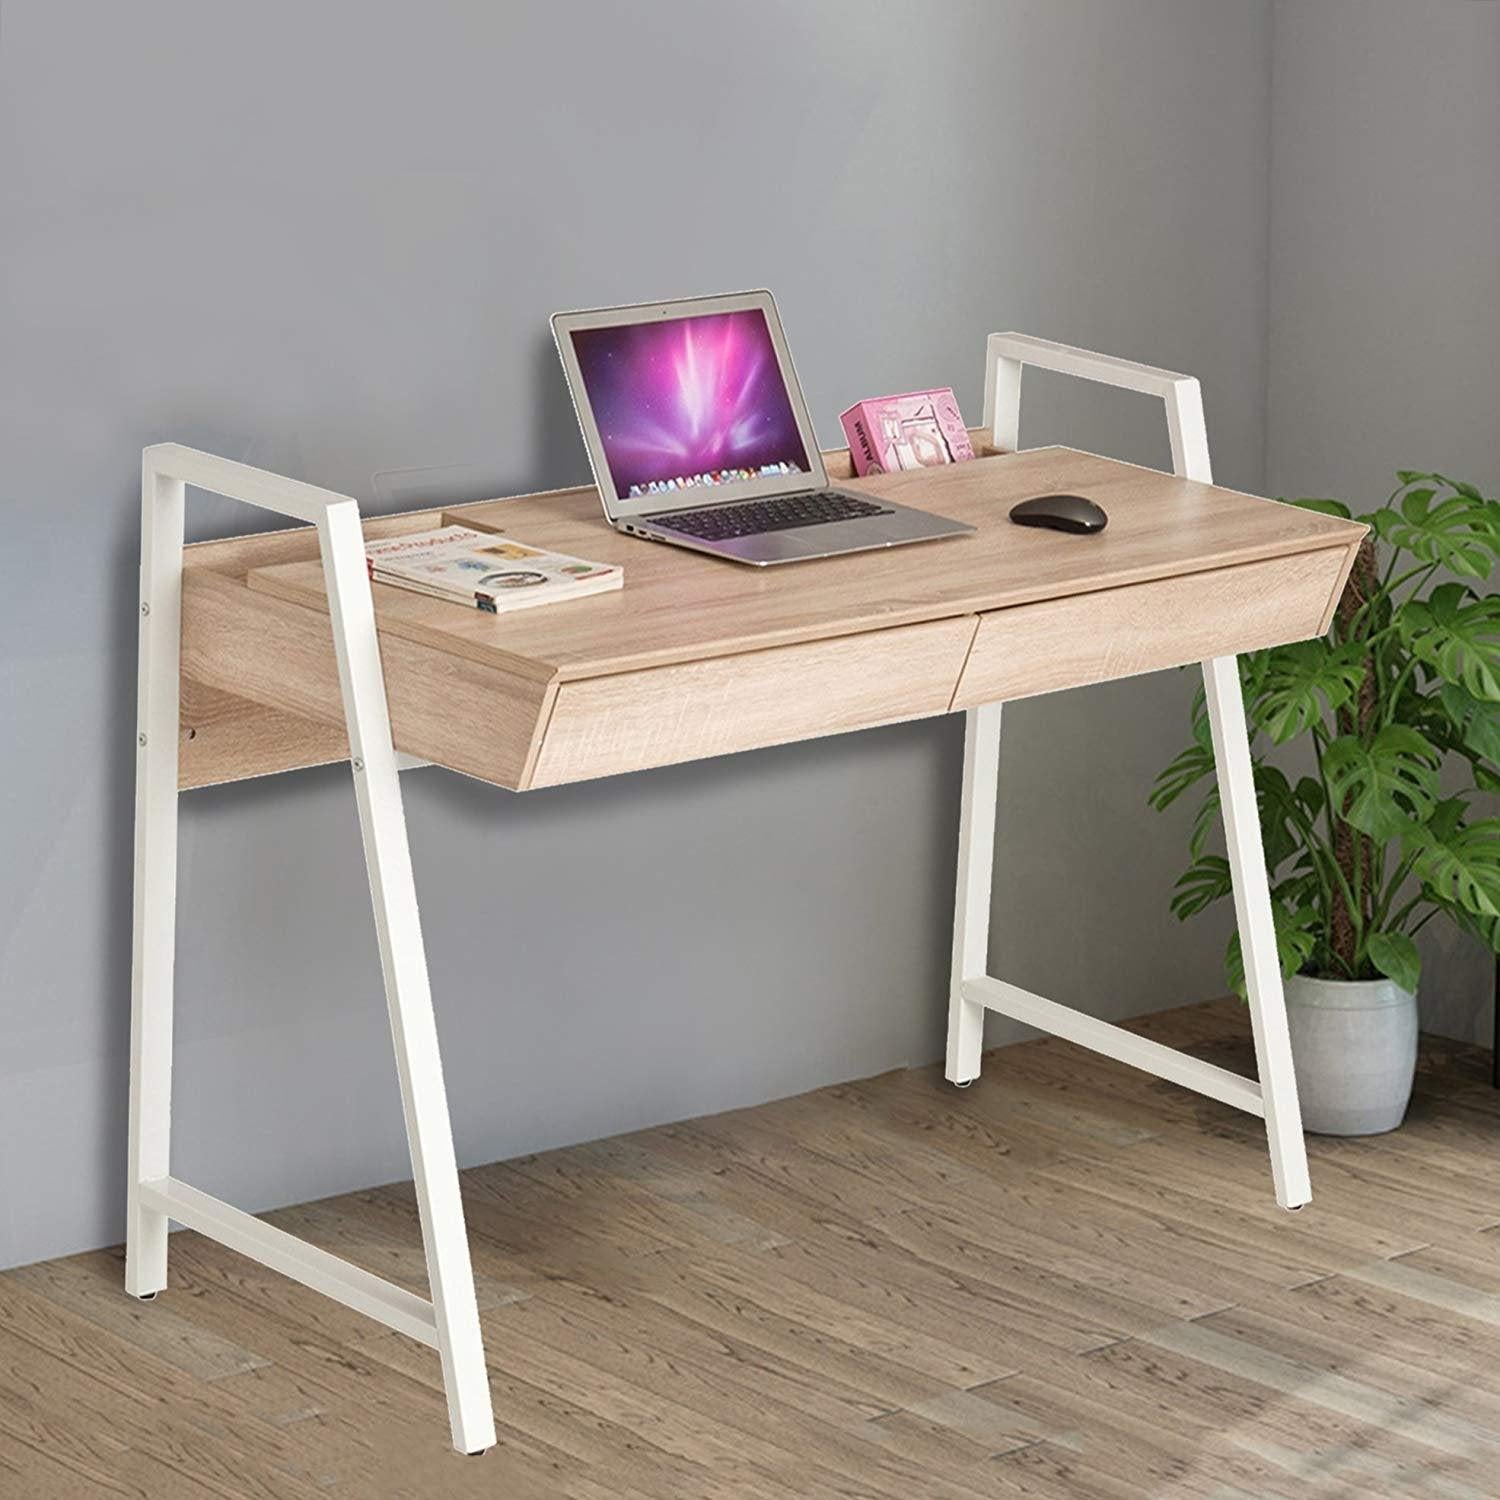 Wood Computer Desk Computer Table Writing Desk Workstation Study Home Office Furniture with Two Draw